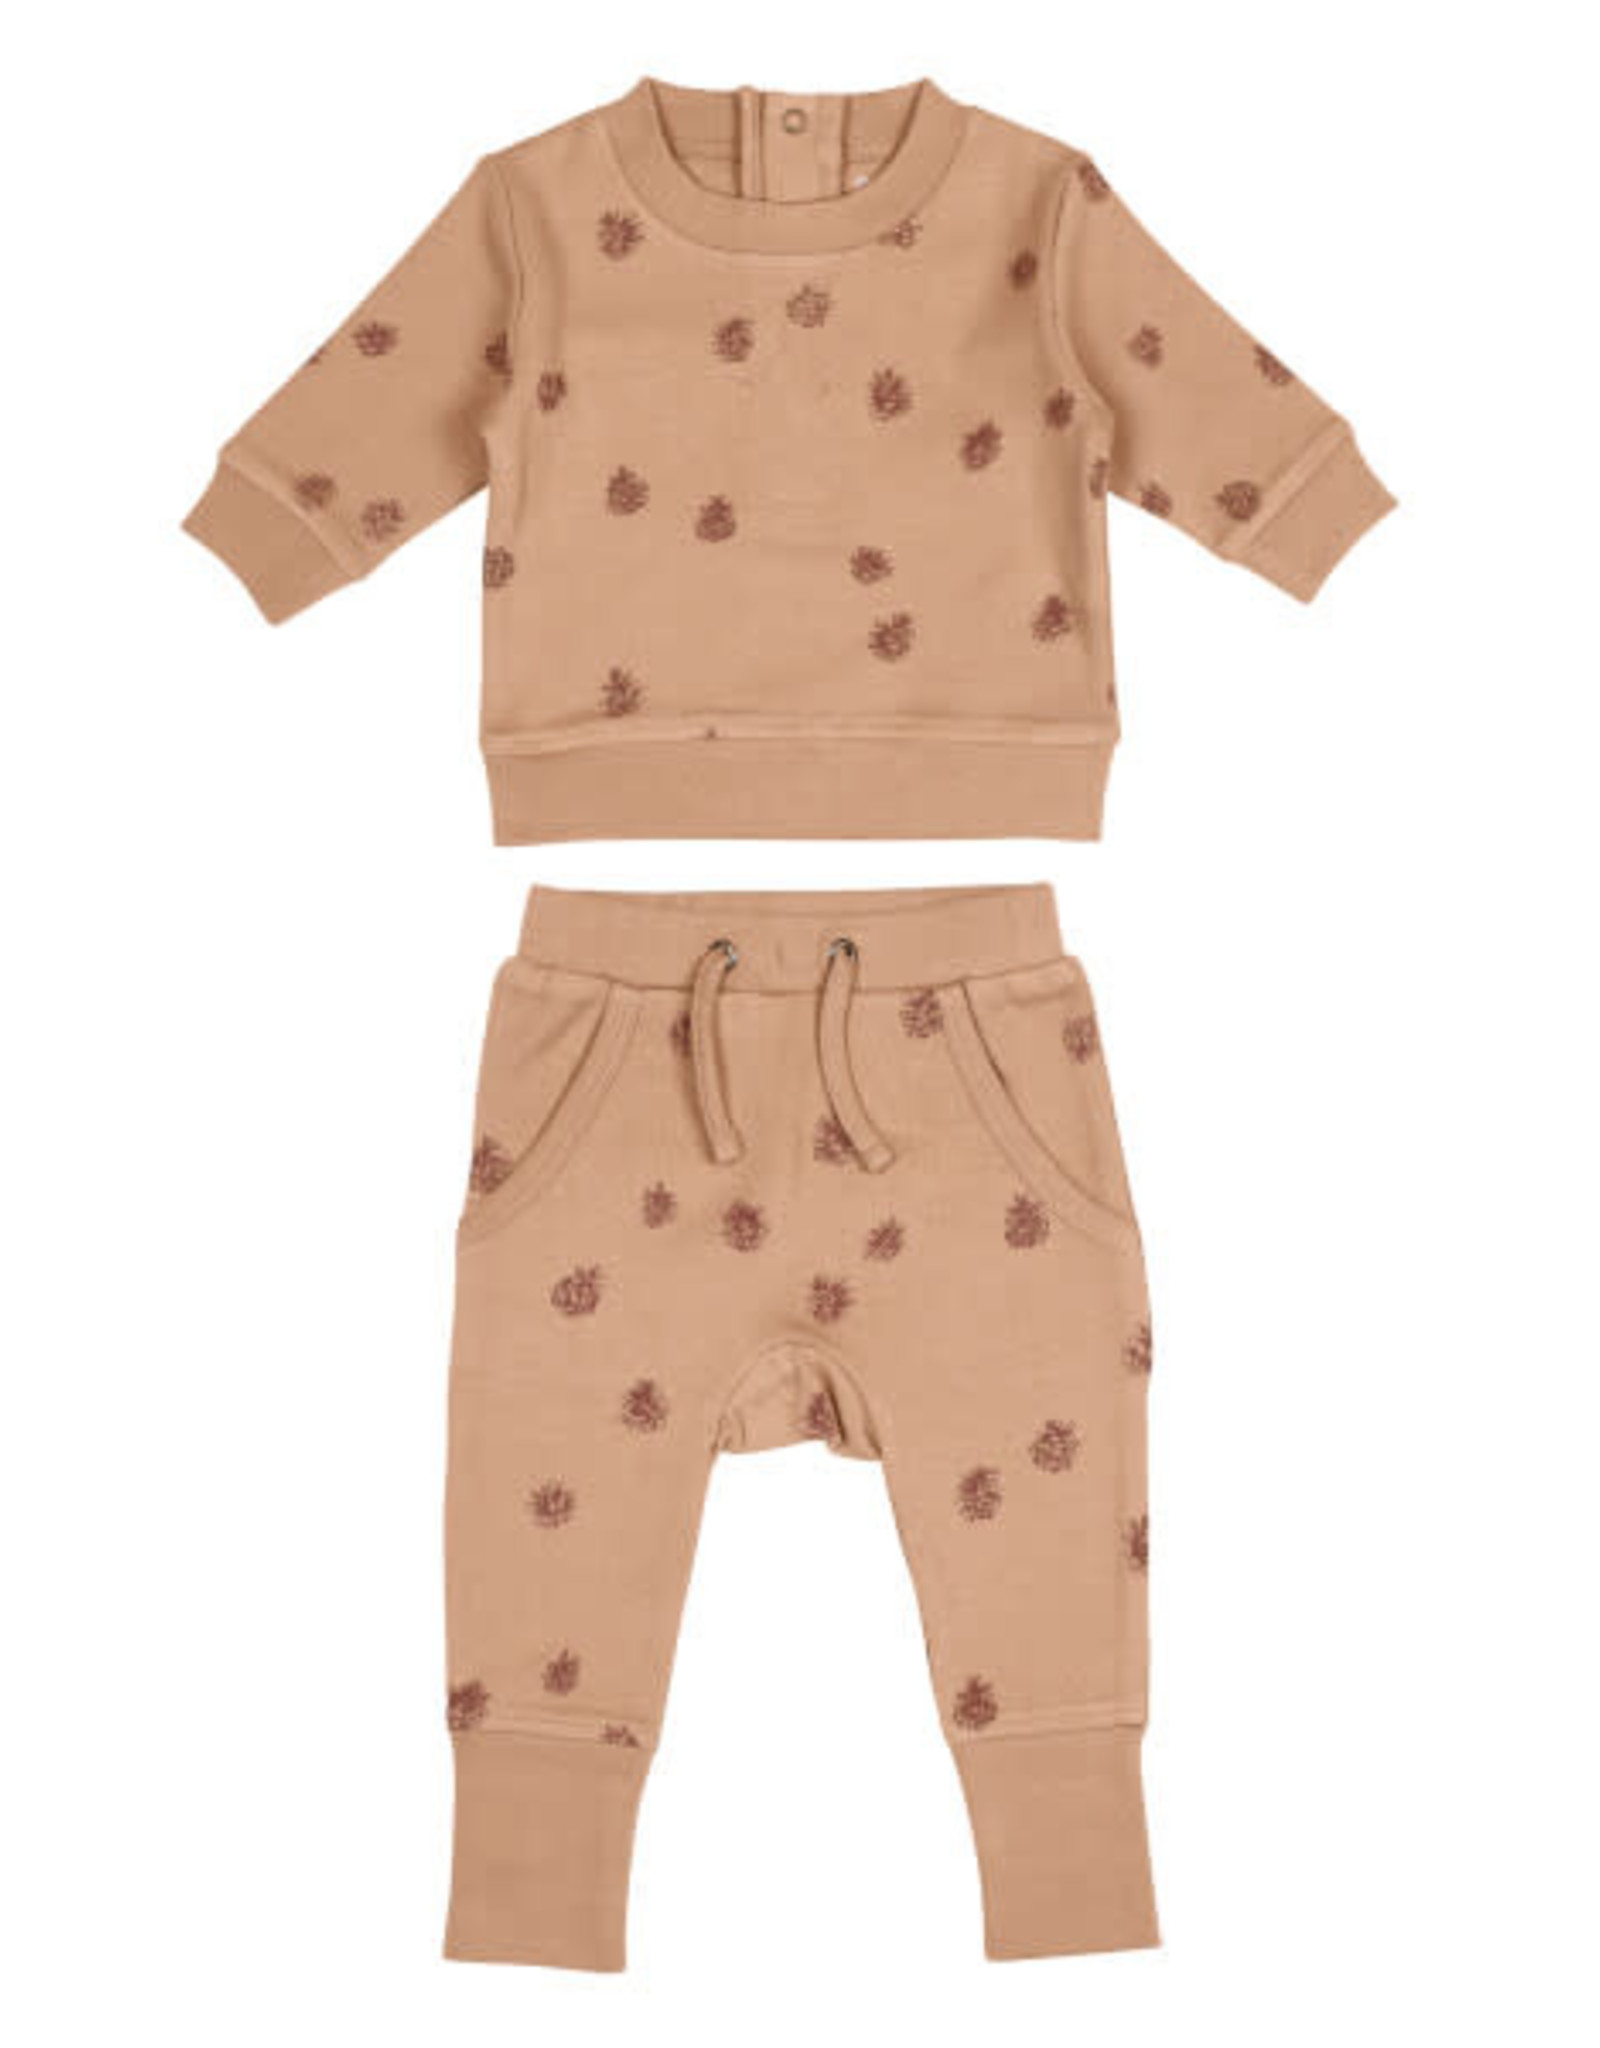 L'oved Baby Baby Nutmeg Sweatshirt & Jogger Set with Pinecone Print